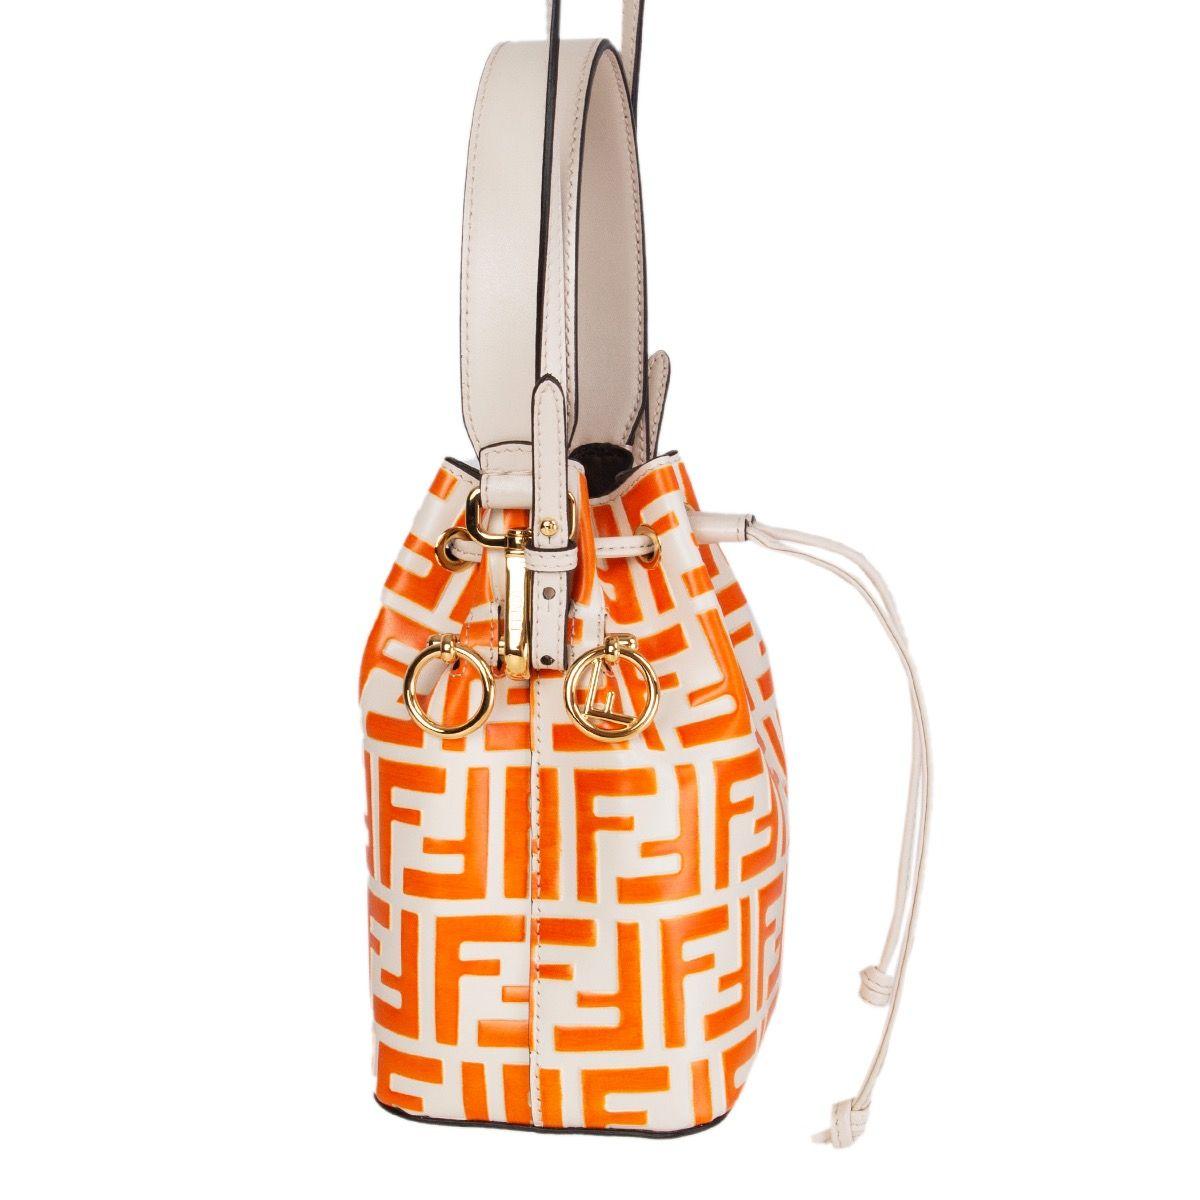 Fendi 'Mon Tresor' mini bucket bag in orange and off-white calfskin FF logo embossed finish, featuring a detachable top-handle, an adjustable shoulder strap, gold-tone hardware and a drawstring fastening. Lined dark taupe alcantara. Has been carried